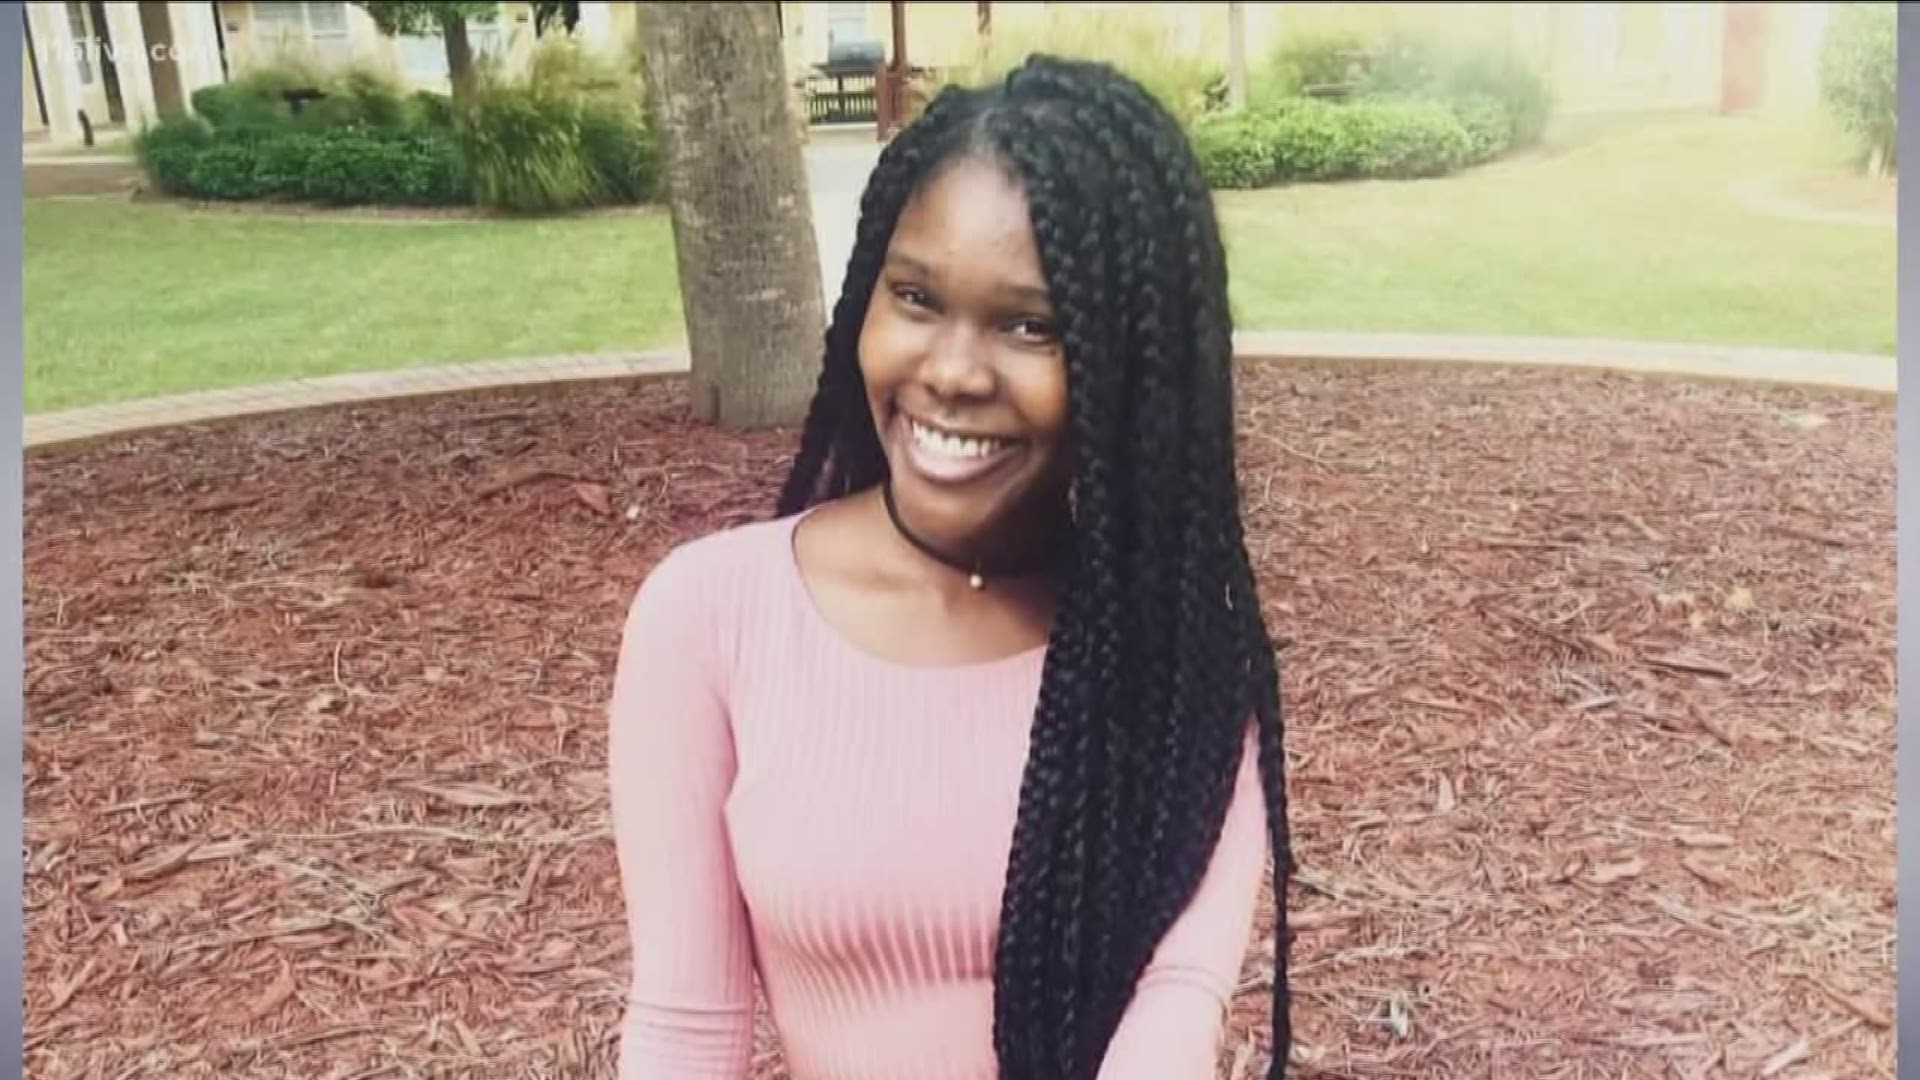 It's been a tough week for students in the Atlanta University Center - especially those who knew a young student who was found dead in a metro Atlanta park.